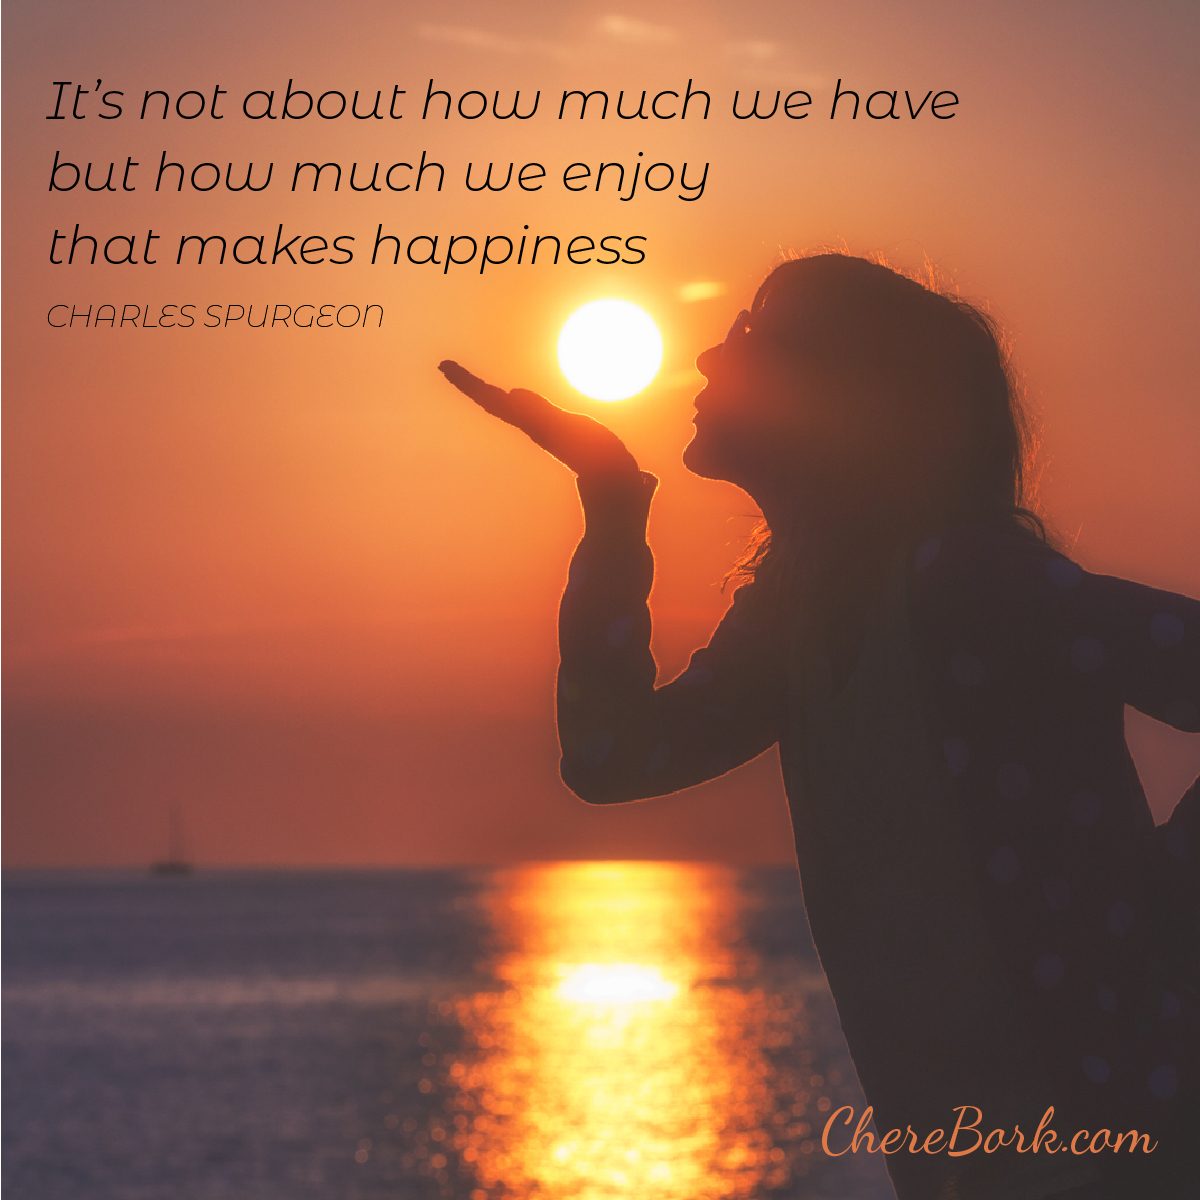 It's not about how much we have but how much we enjoy that makes happiness. -Charles Spurgeon